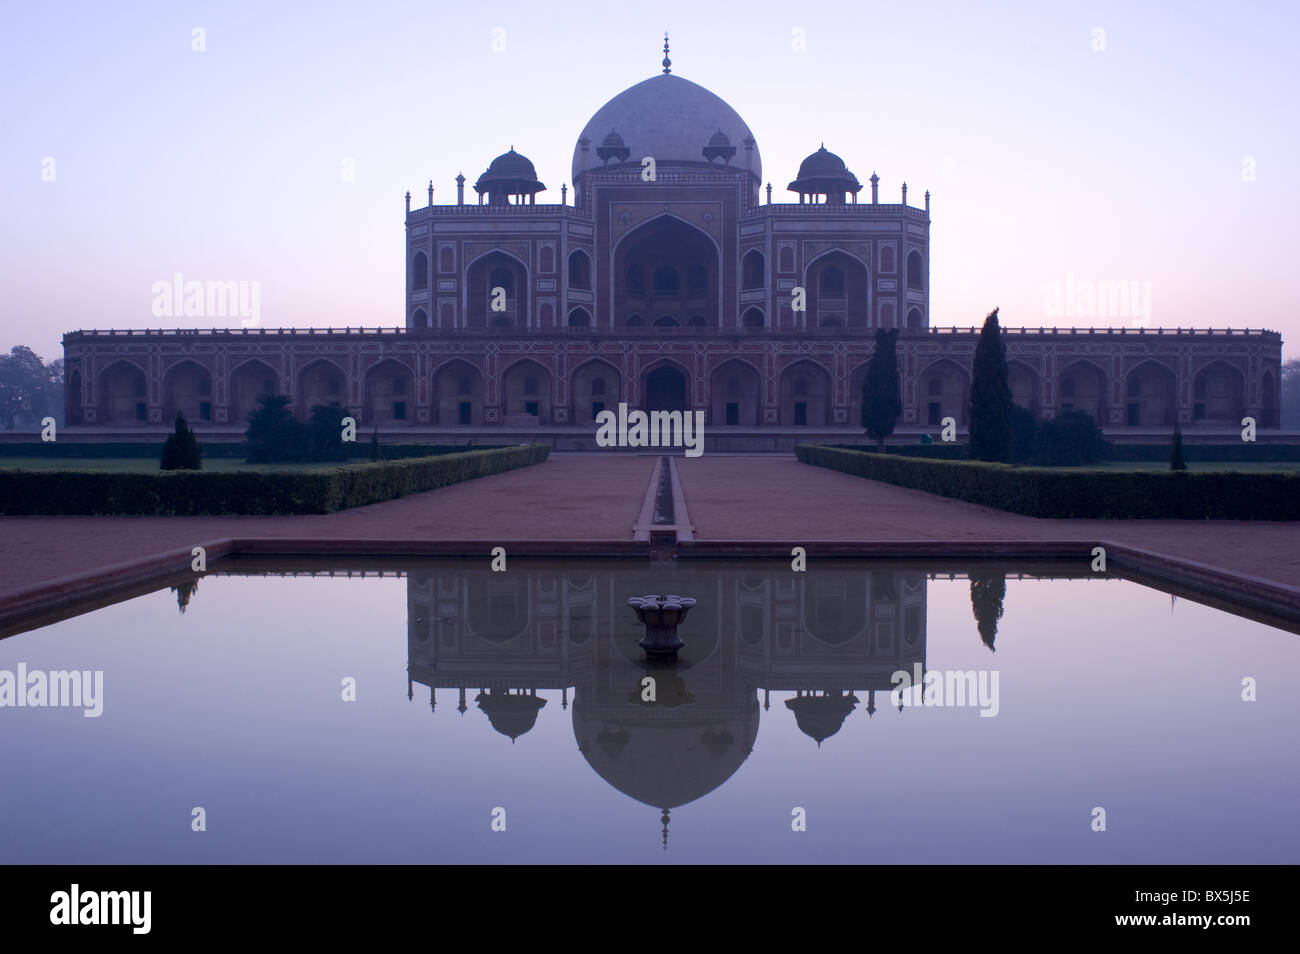 Humayun's Tomb, UNESCO World Heritage Site, the first great example of a Mughal garden tomb, at sunrise, Delhi, India, Asia Stock Photo